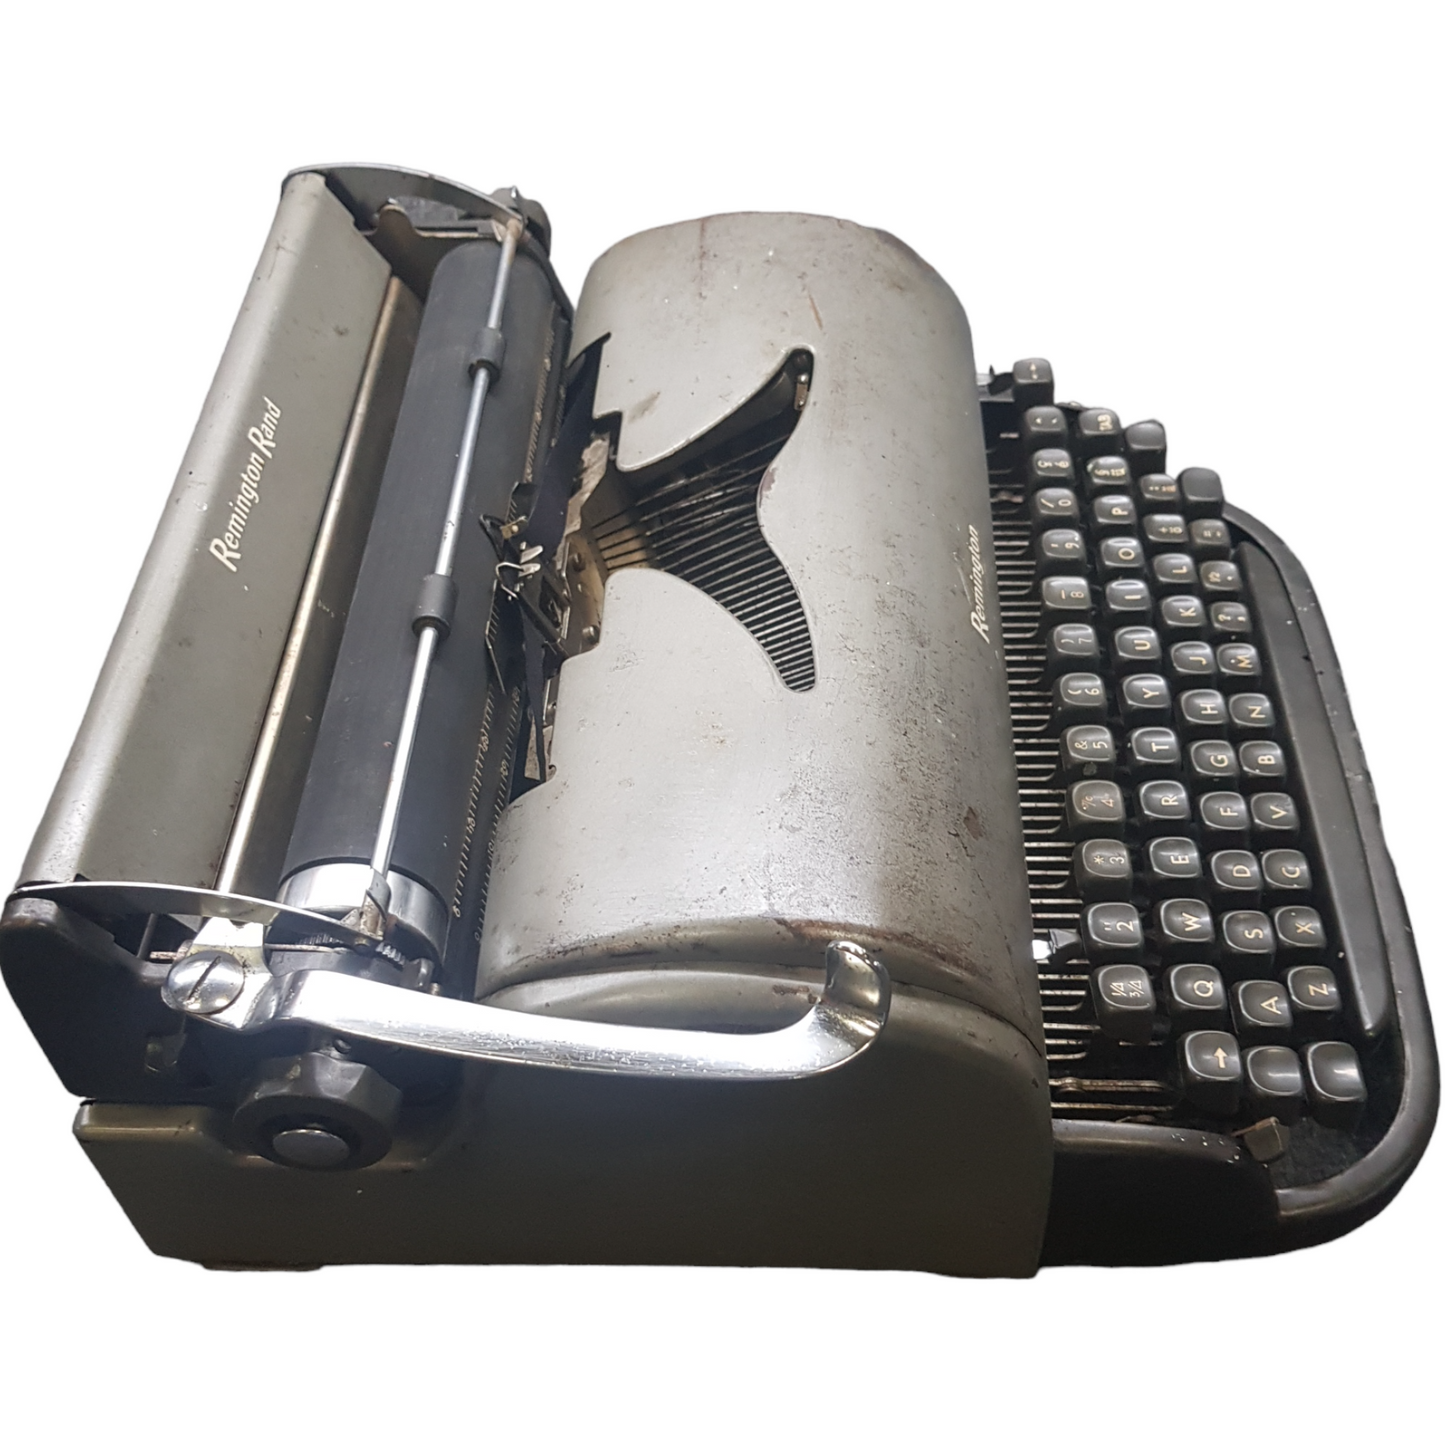 Image of Remington Personal Typewriter. A mid Size Portable Typewriter. Made in the USA. Available from Universal Typewriter Company.